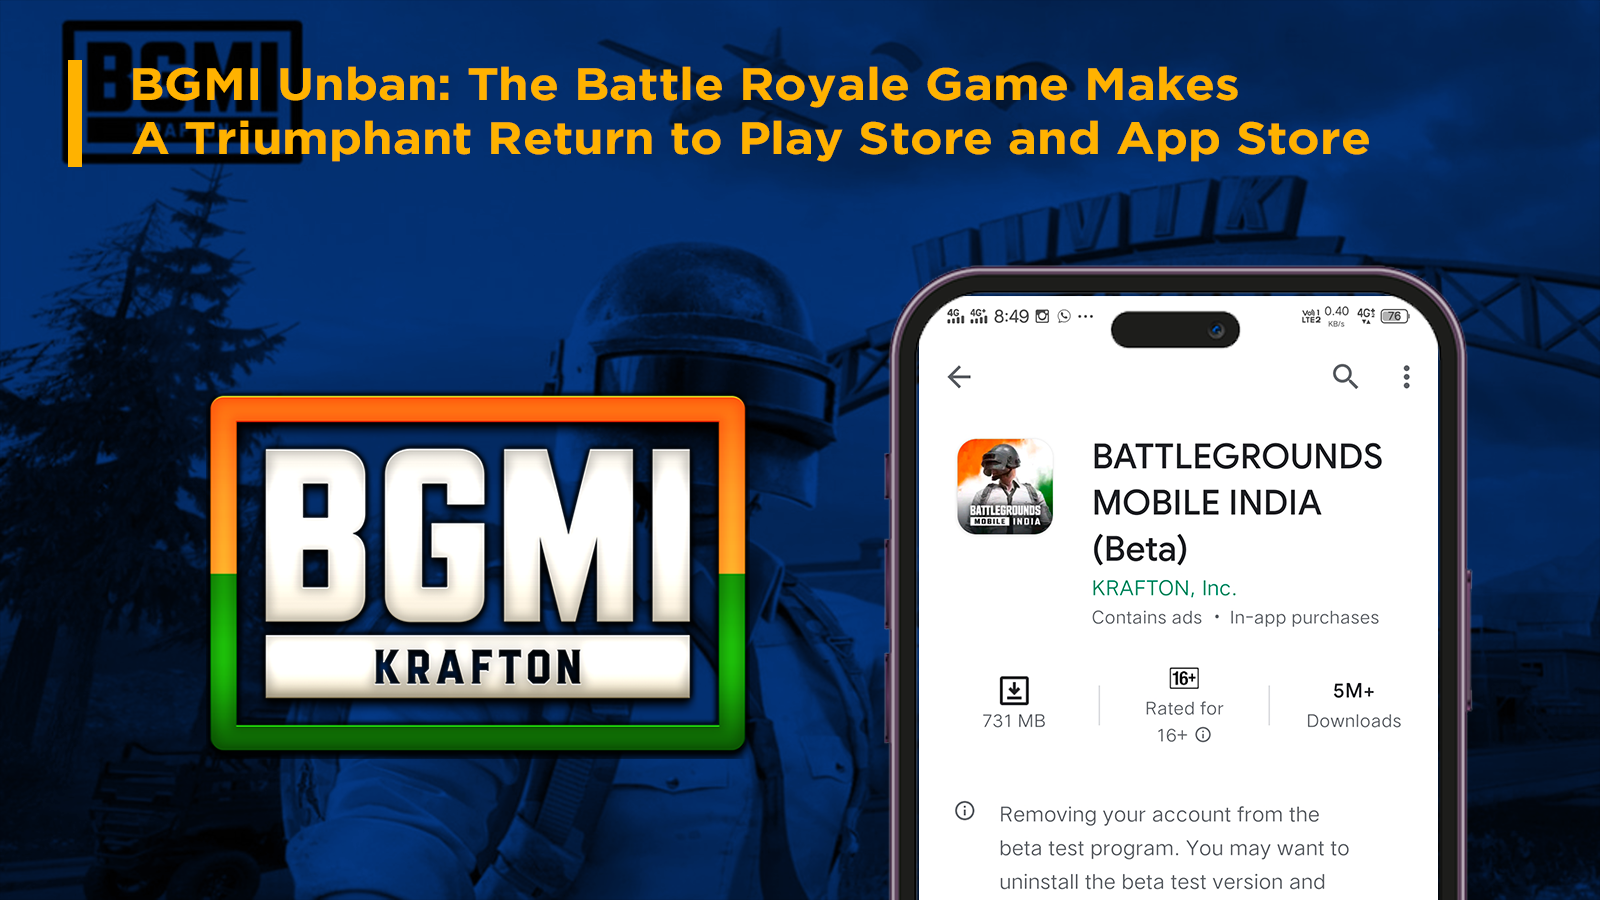 BGMI Unban: The Battle Royale Game Makes A Triumphant Return to Play Store and App Store